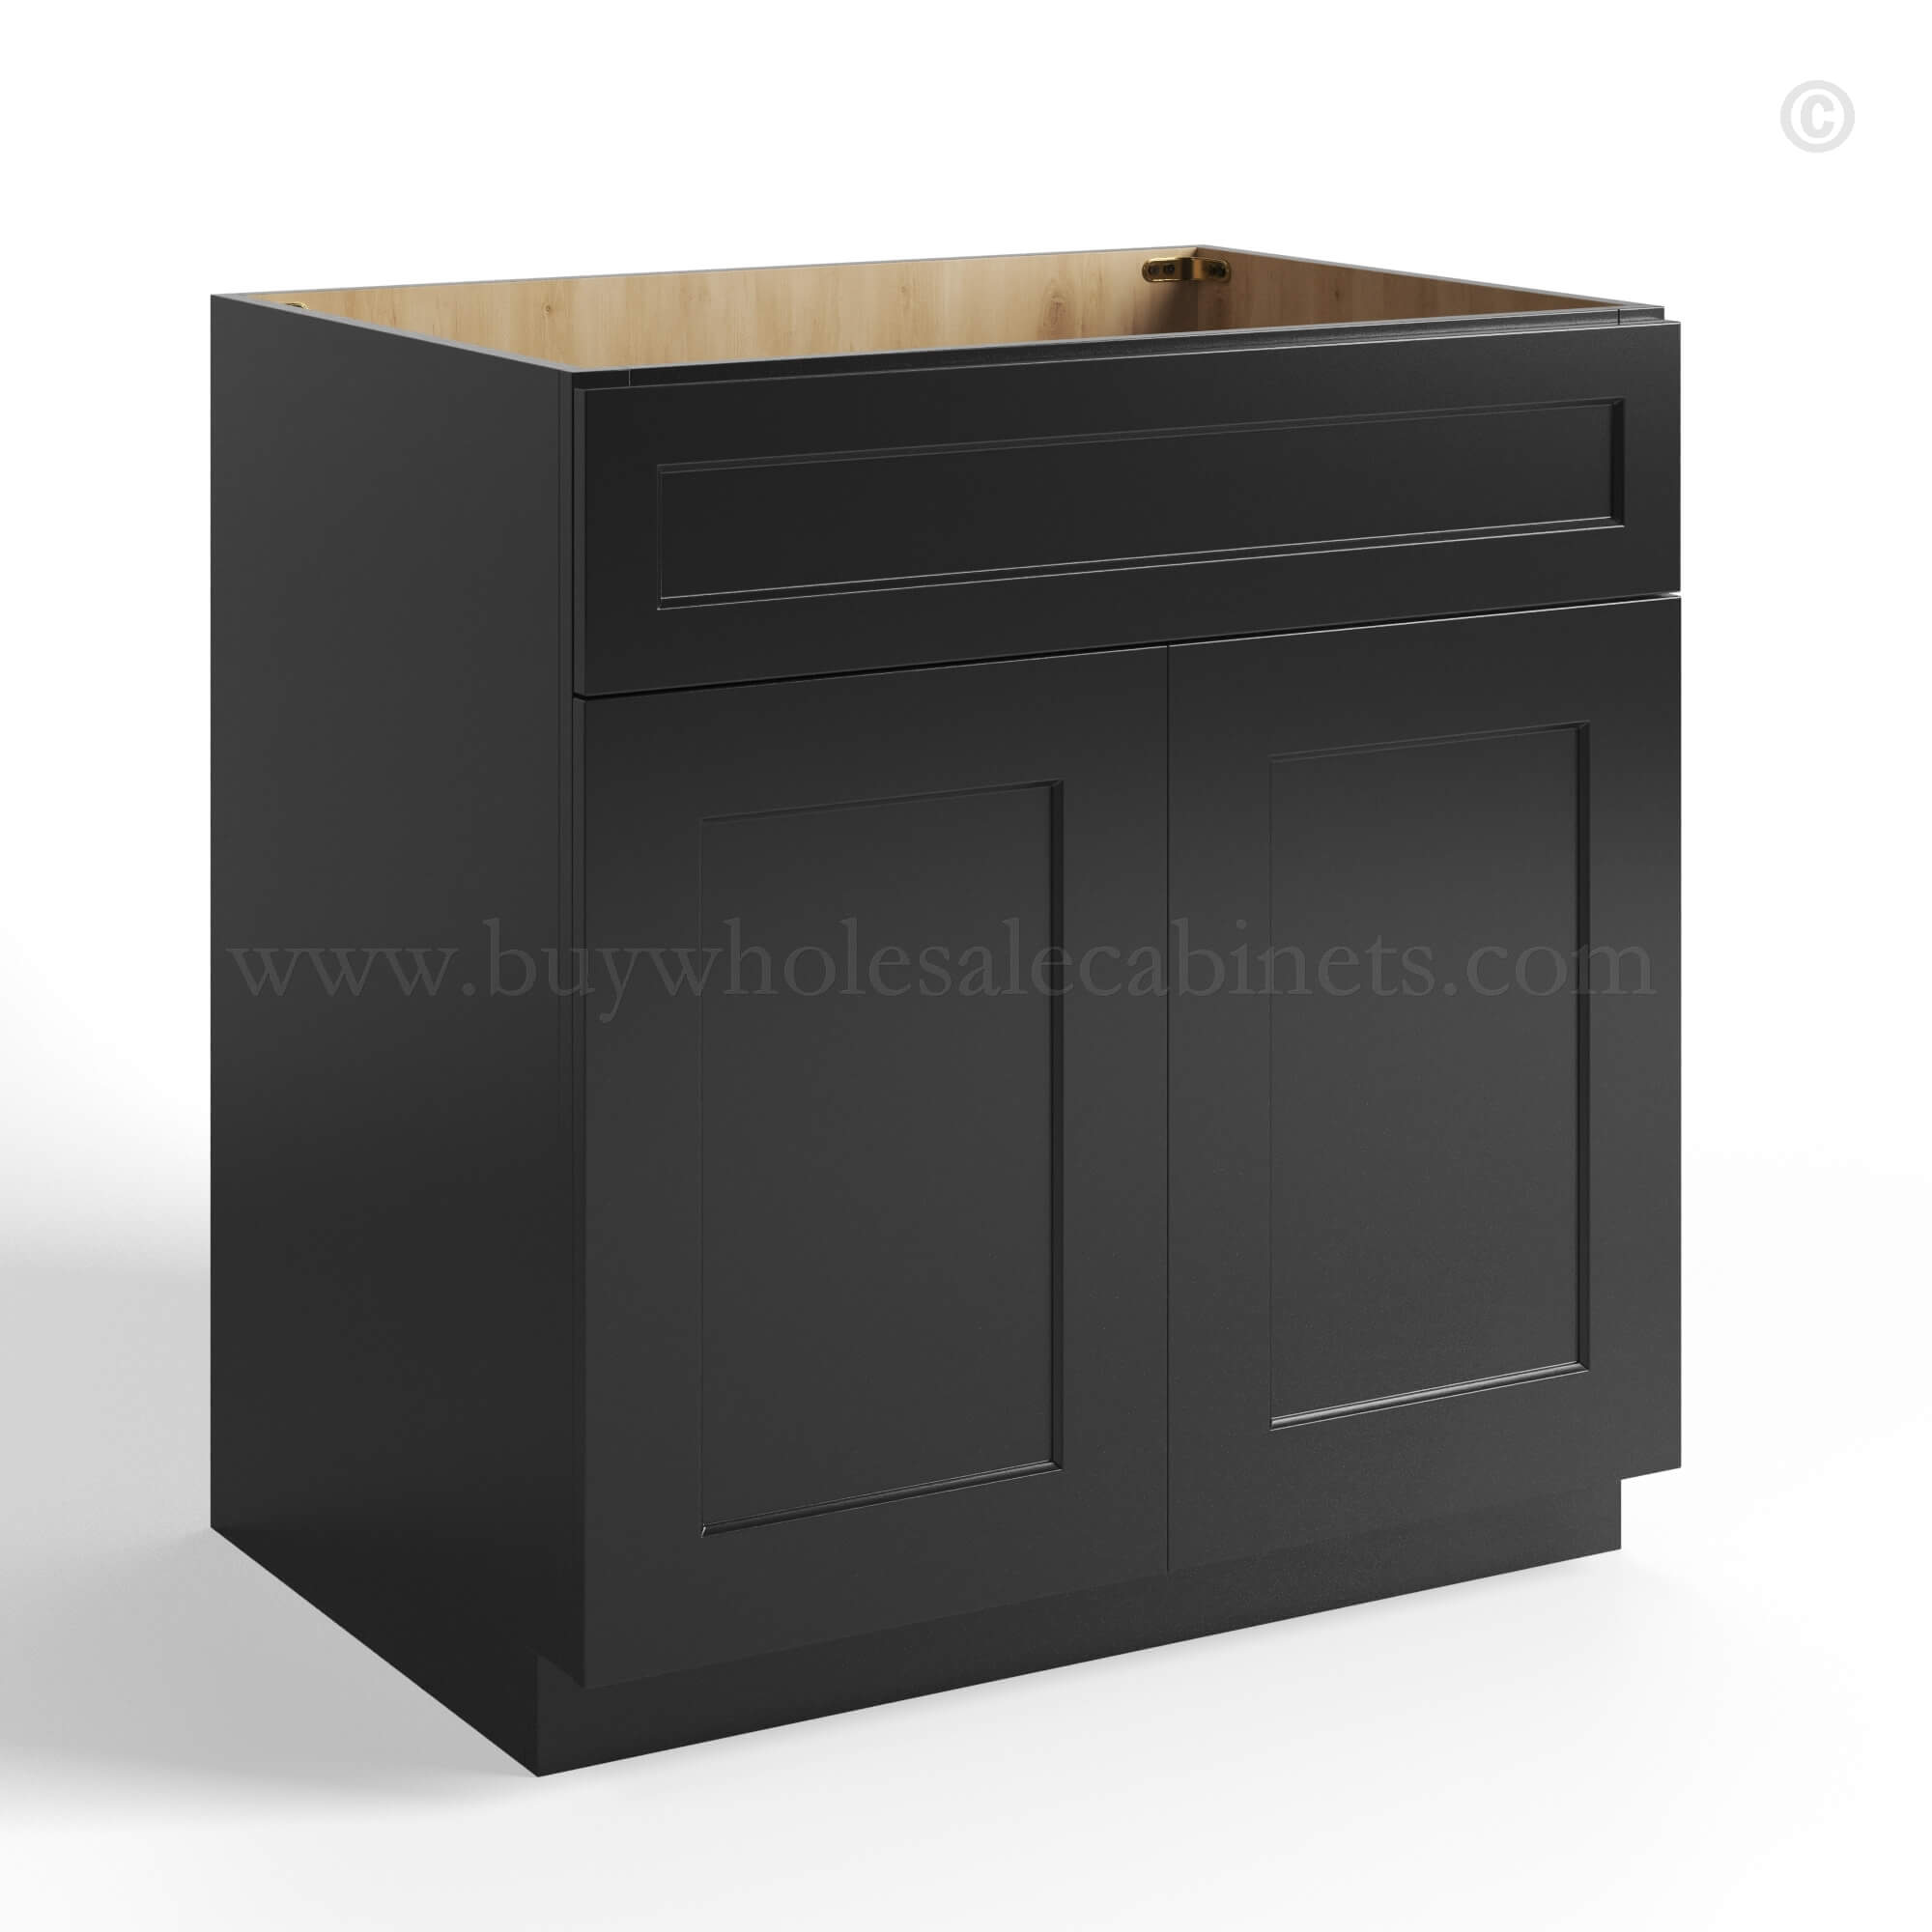 Black Shaker Sink Base Double Door and 1 False Drawer, rta cabinets, wholesale cabinets